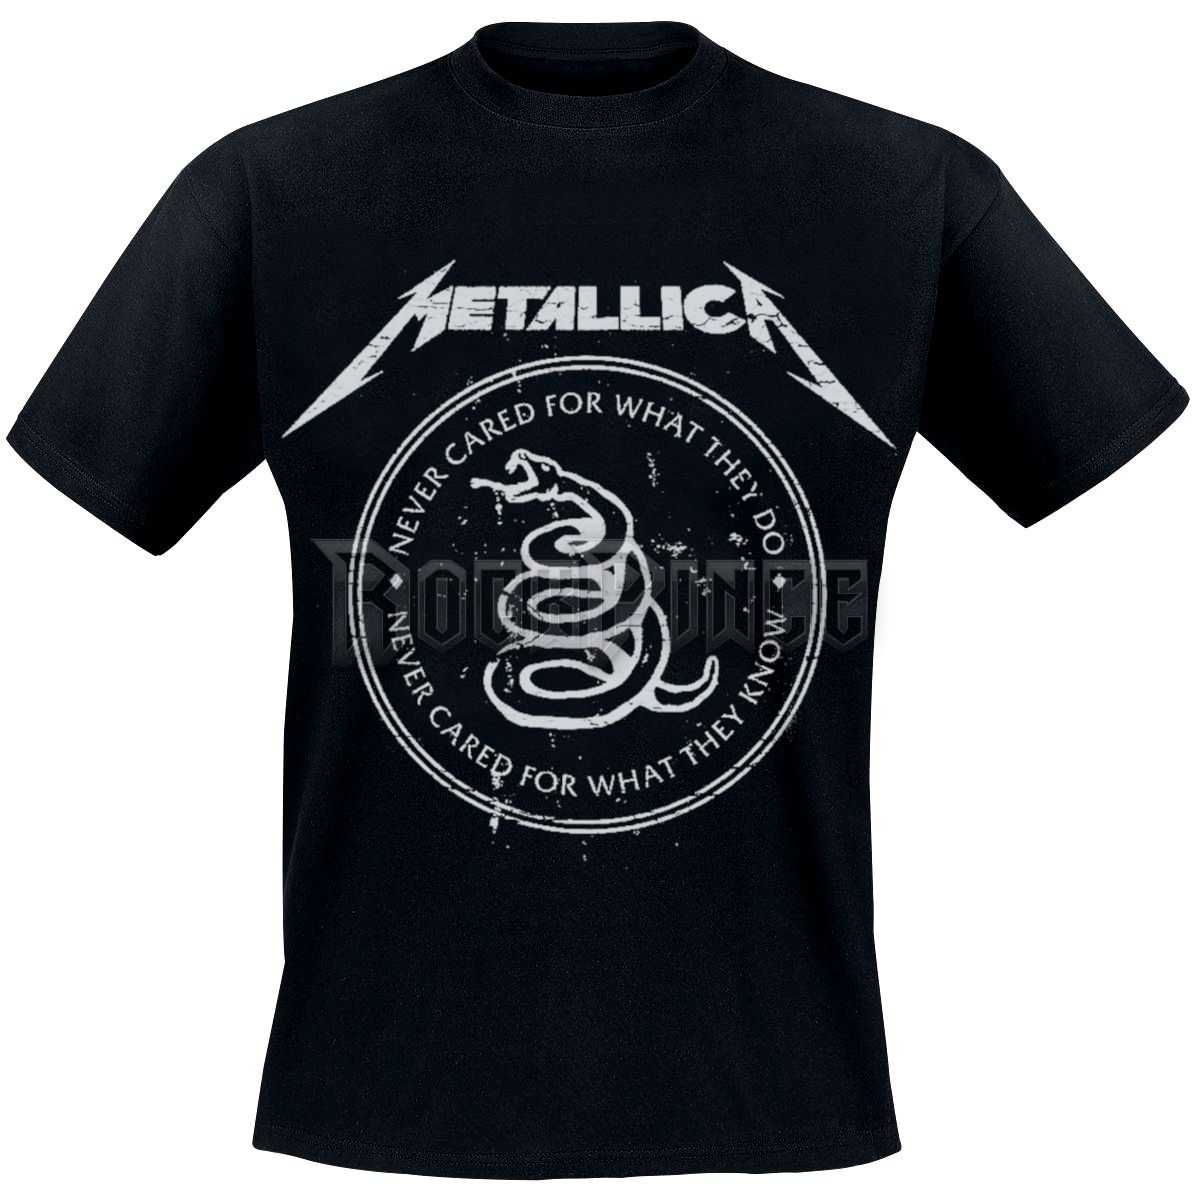 Metallica - Never Cared For What They Do - UNISEX PÓLÓ